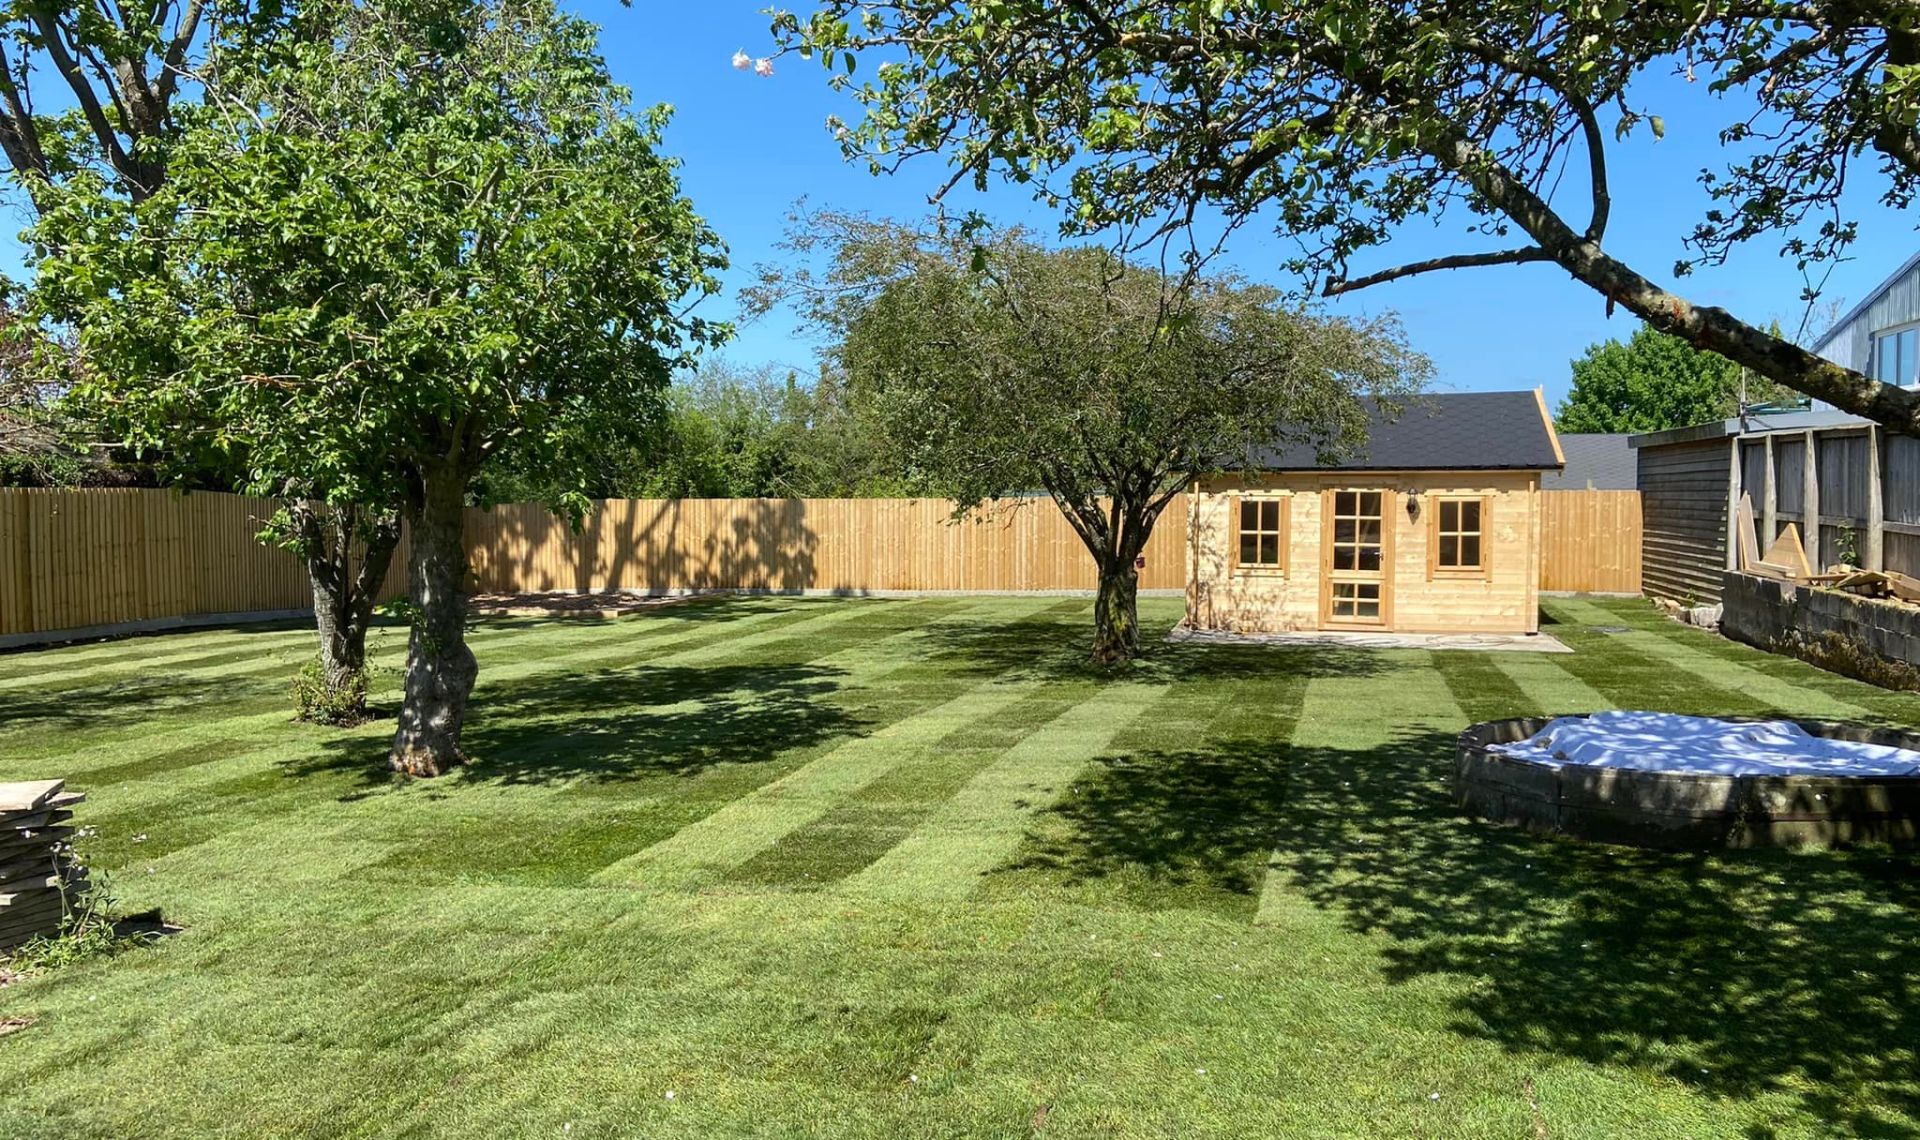 Large landscaping project with new grass, fencing and wooden shed.